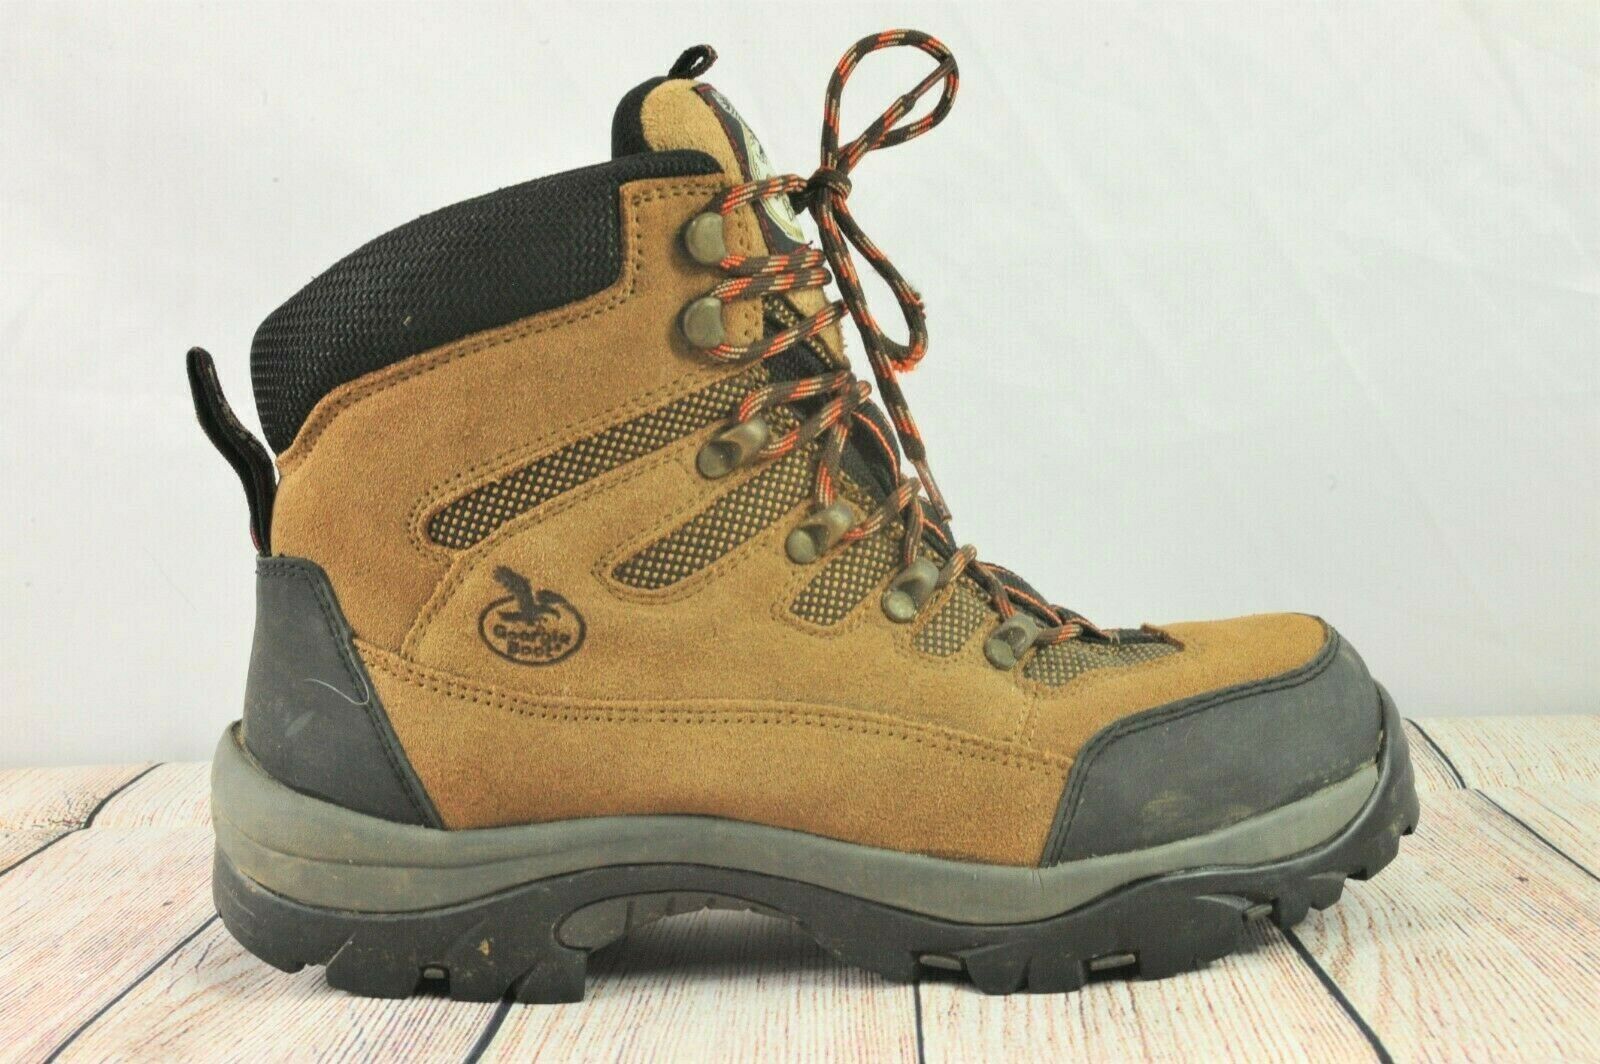 Georgia Boot Men's Size 7.5 Hiking Boots Outdoors Work